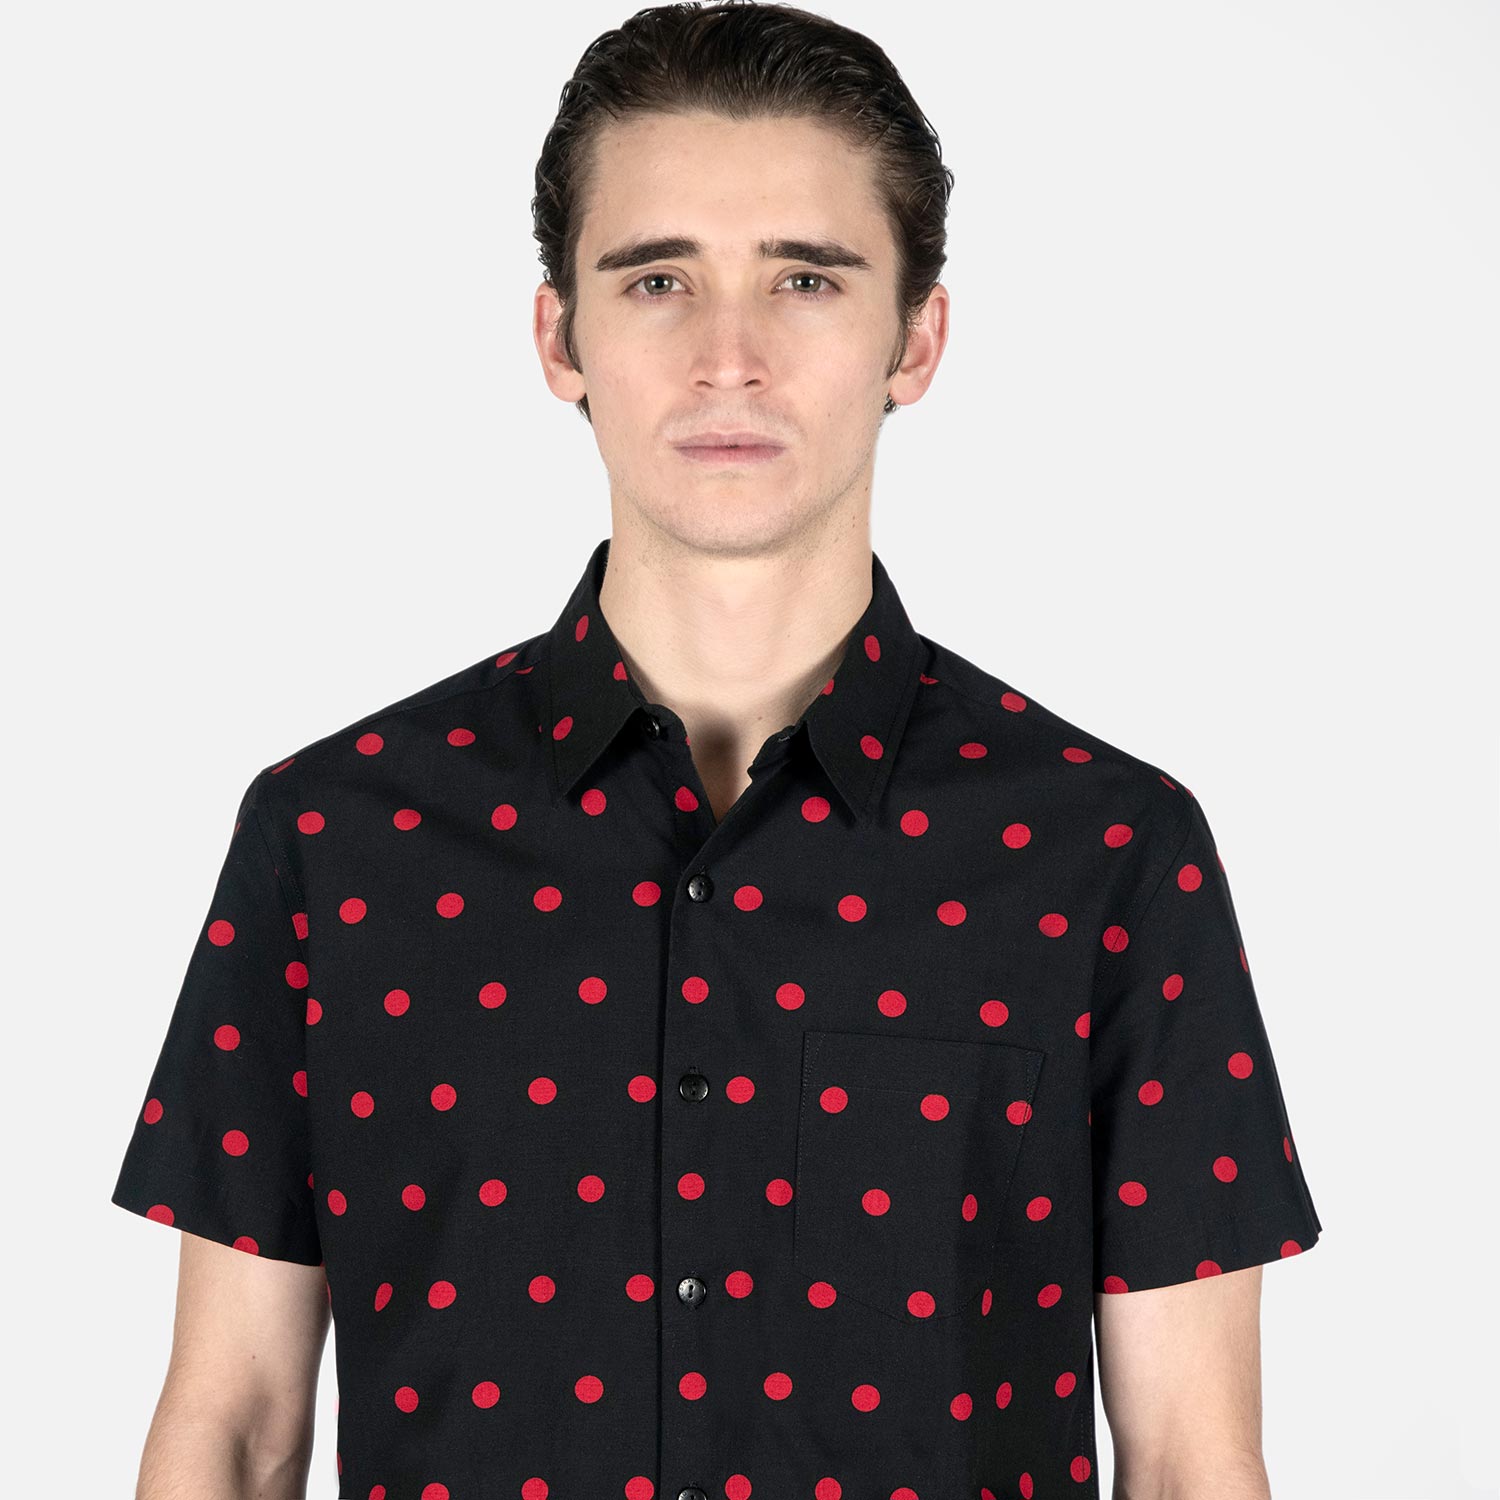 Stepping Stone - Black and Red Polka Dot Shirt - Men's by Straight to Hell